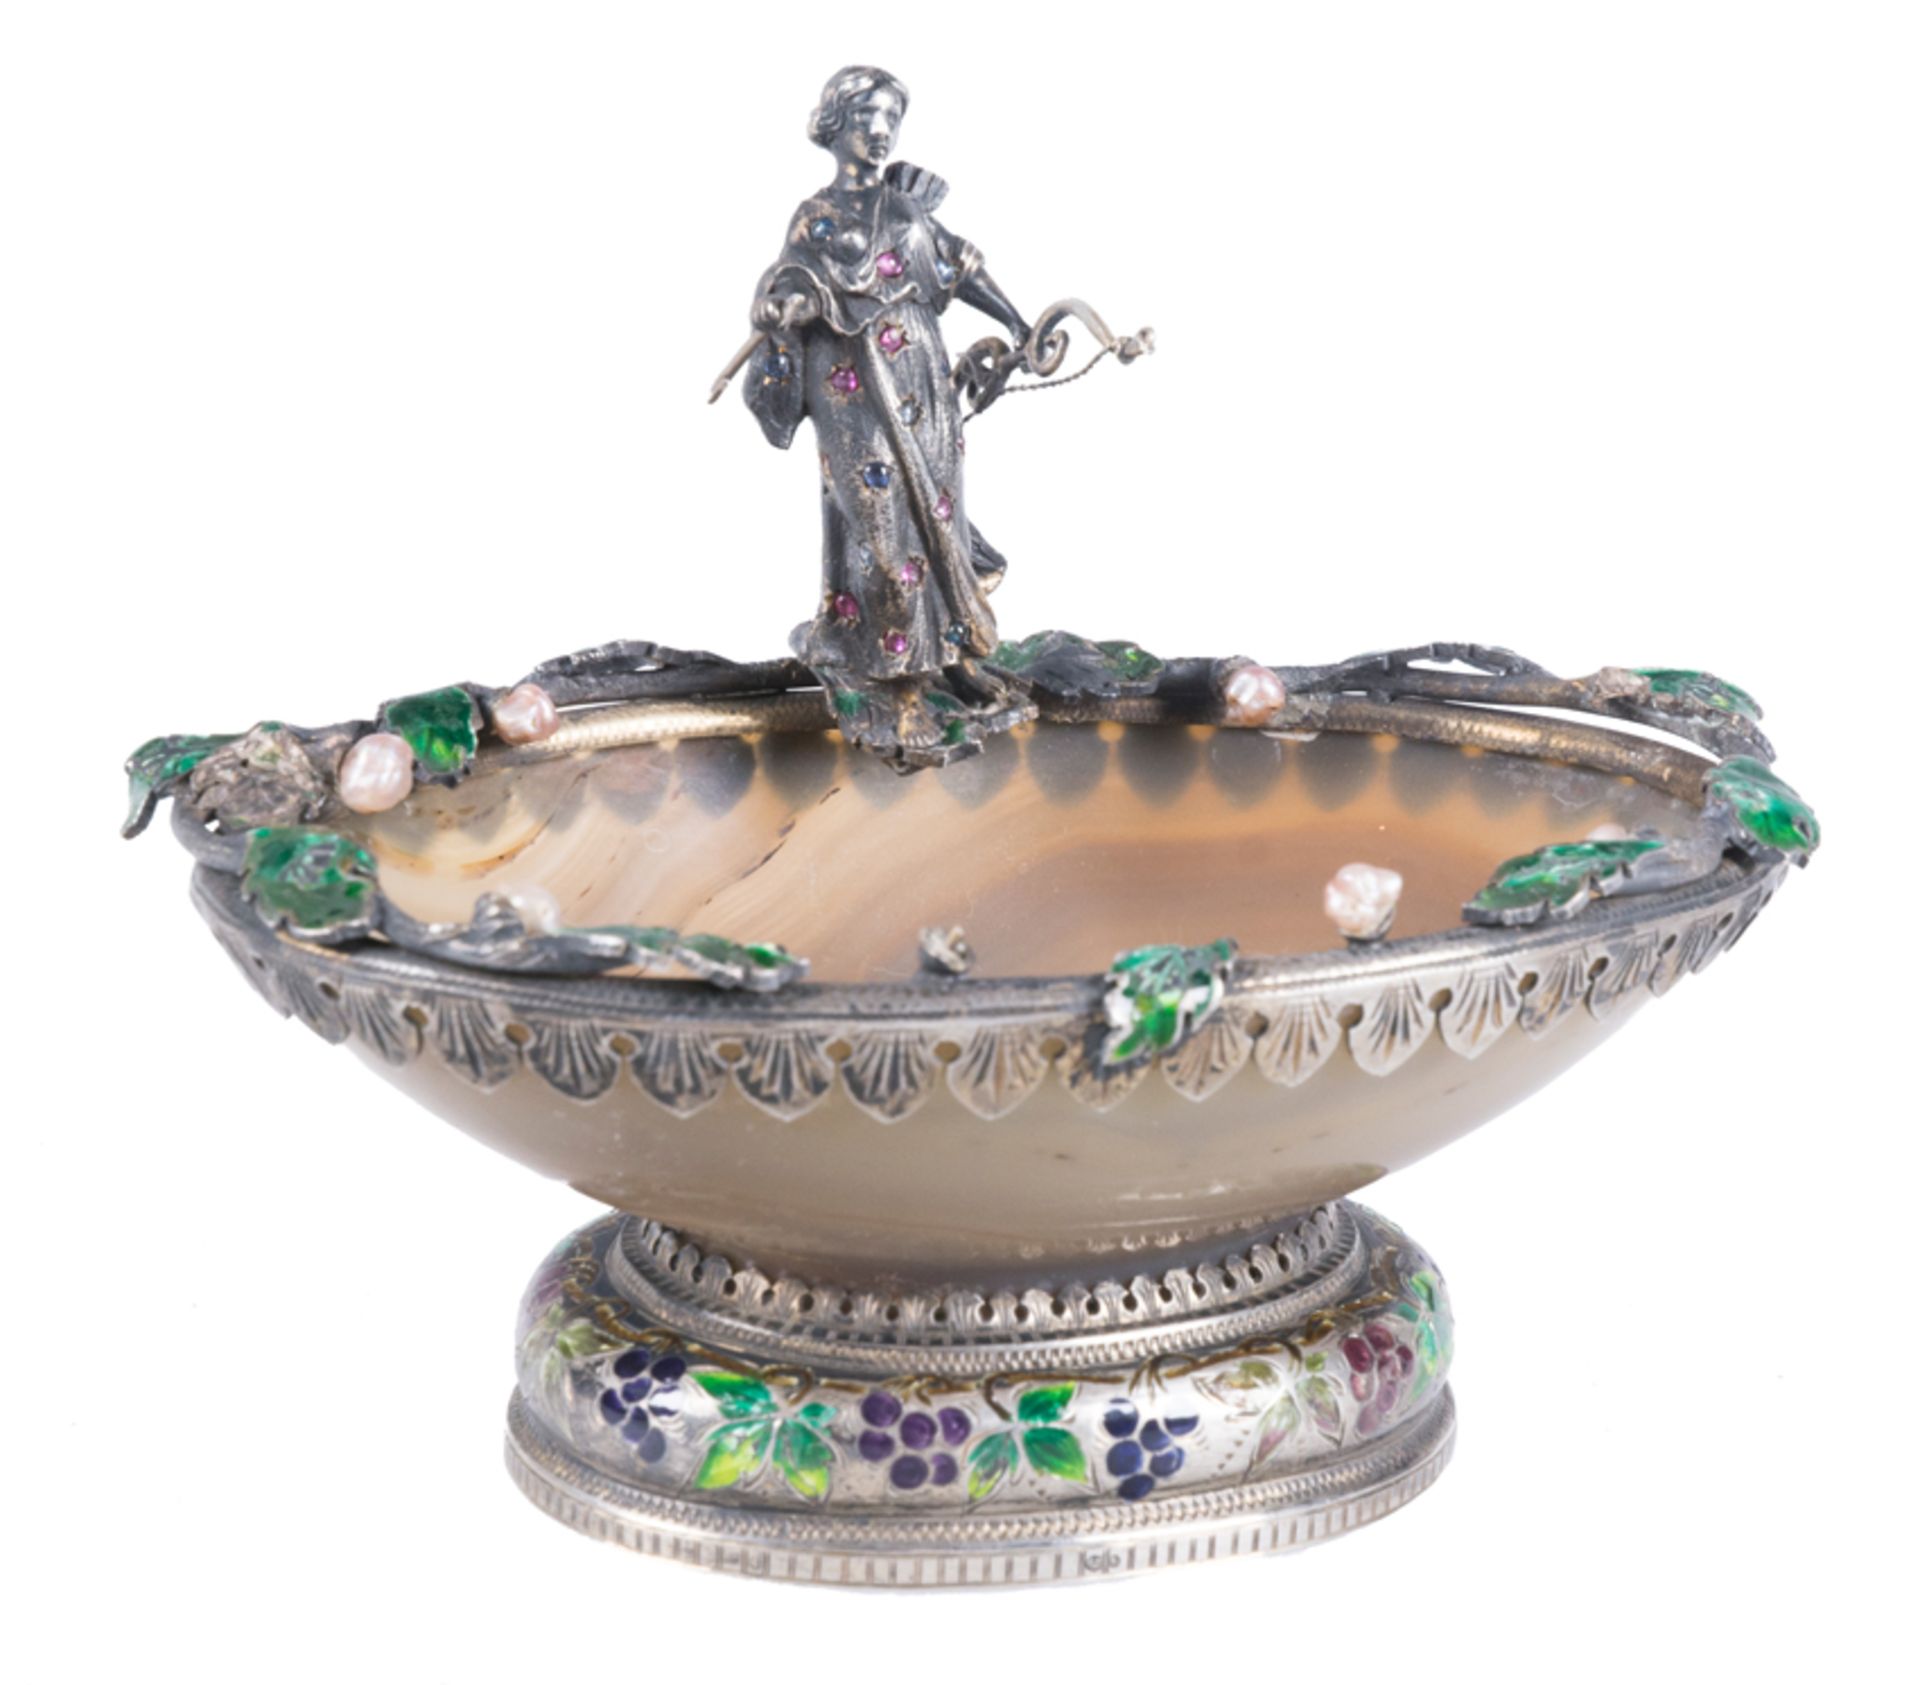 Carnelian or onyx salt cellar with silver and enamel mount. Possibly Vienna. 19th century.